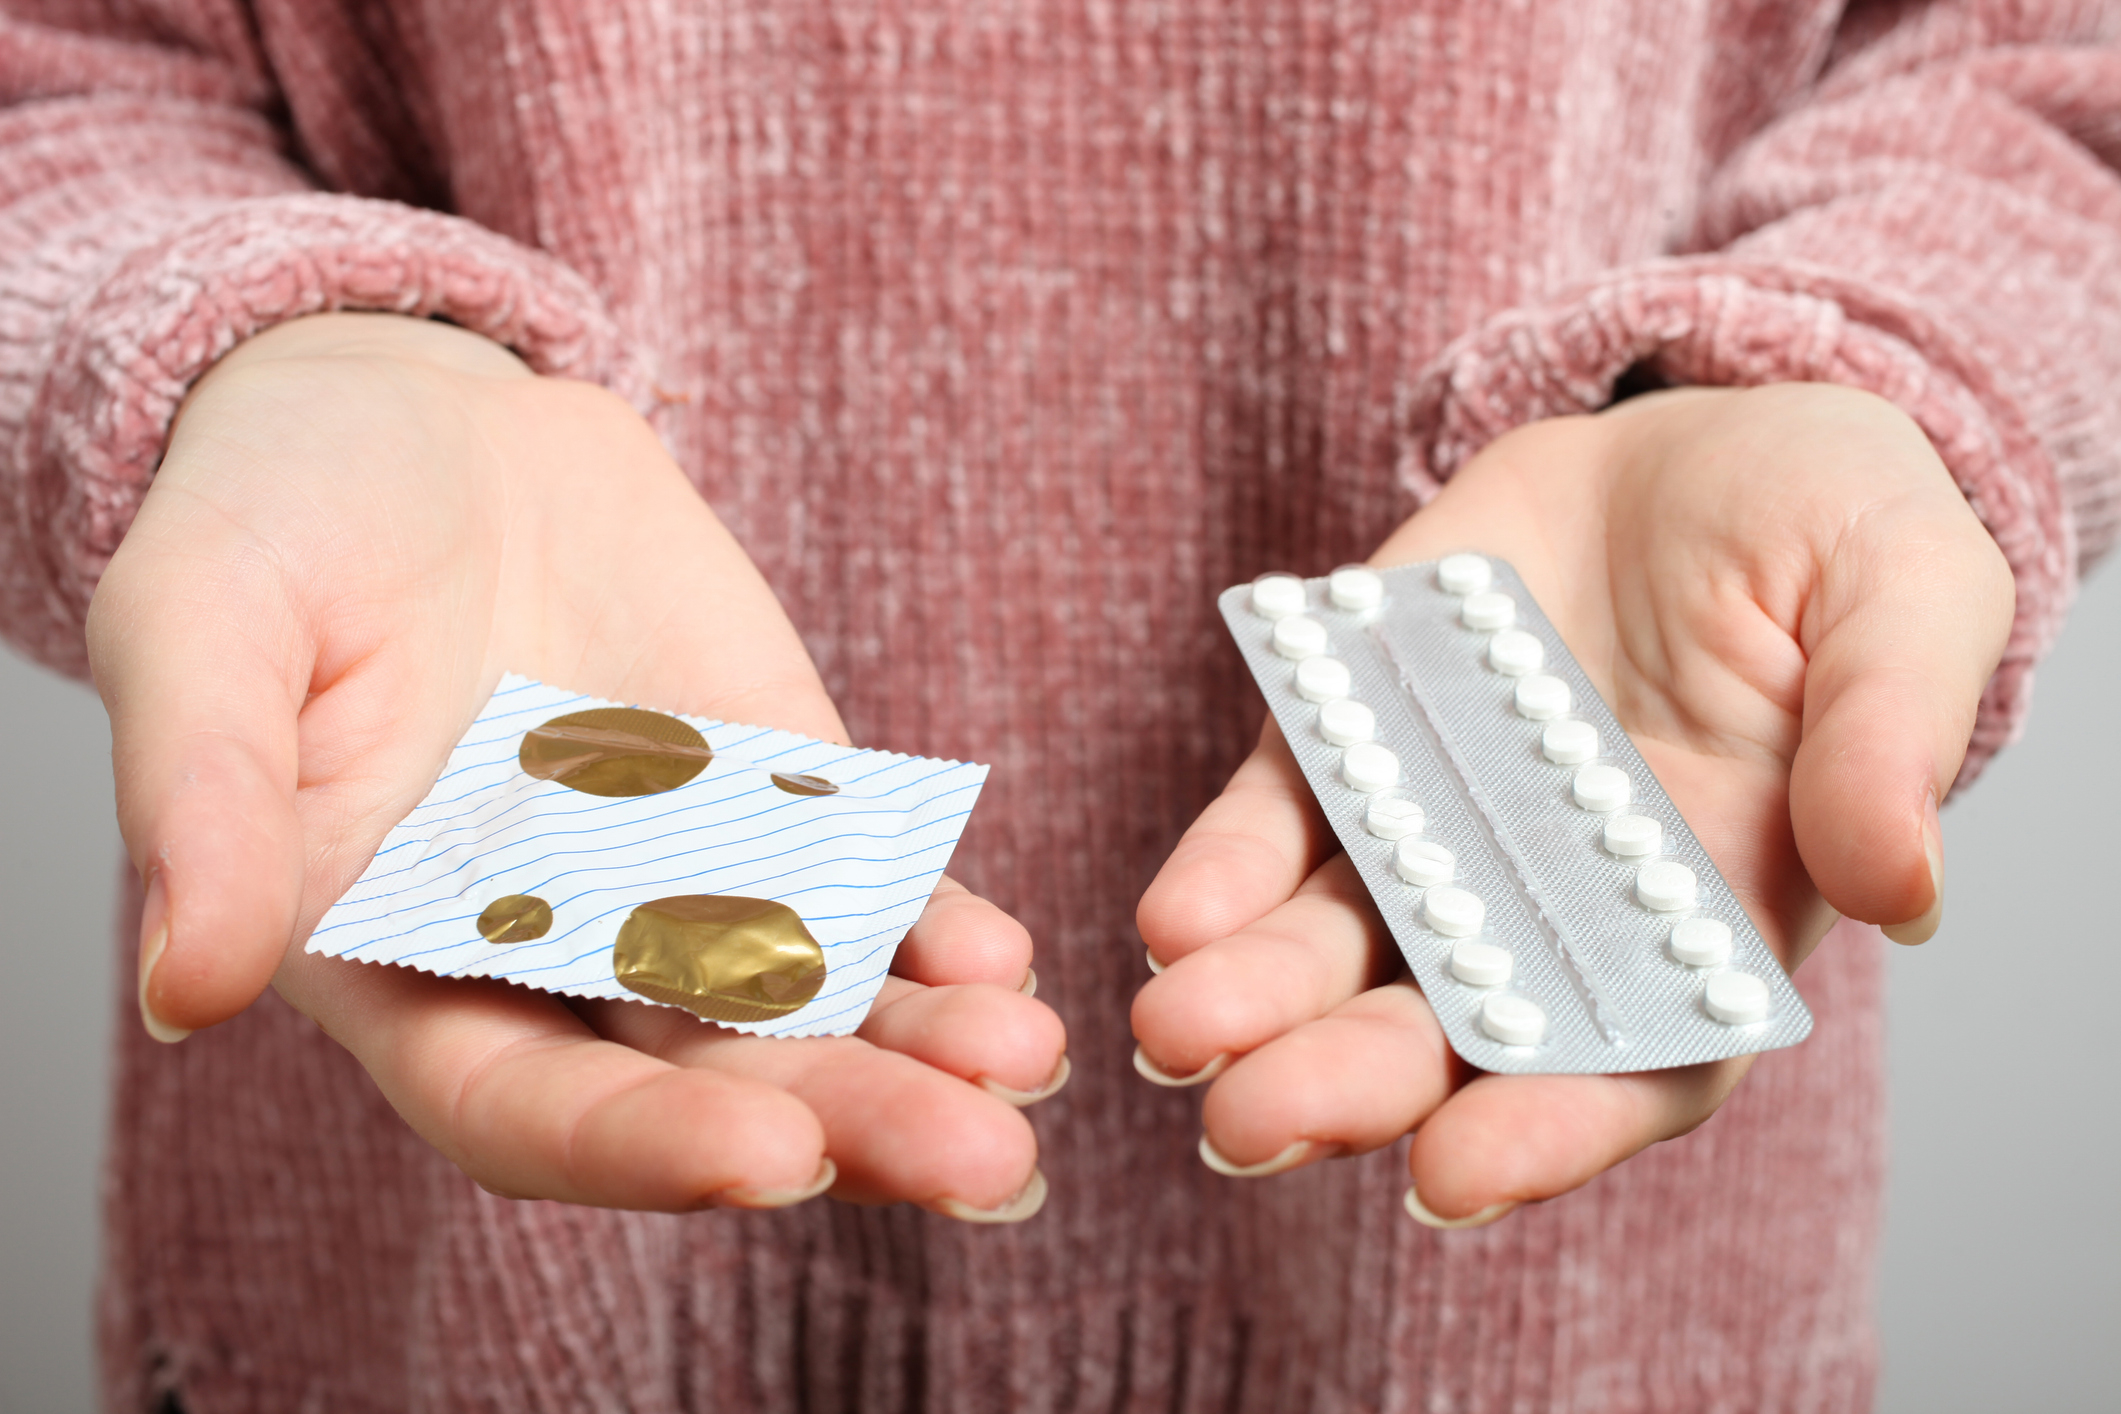 Person holding a blister pack of pills and a condom package